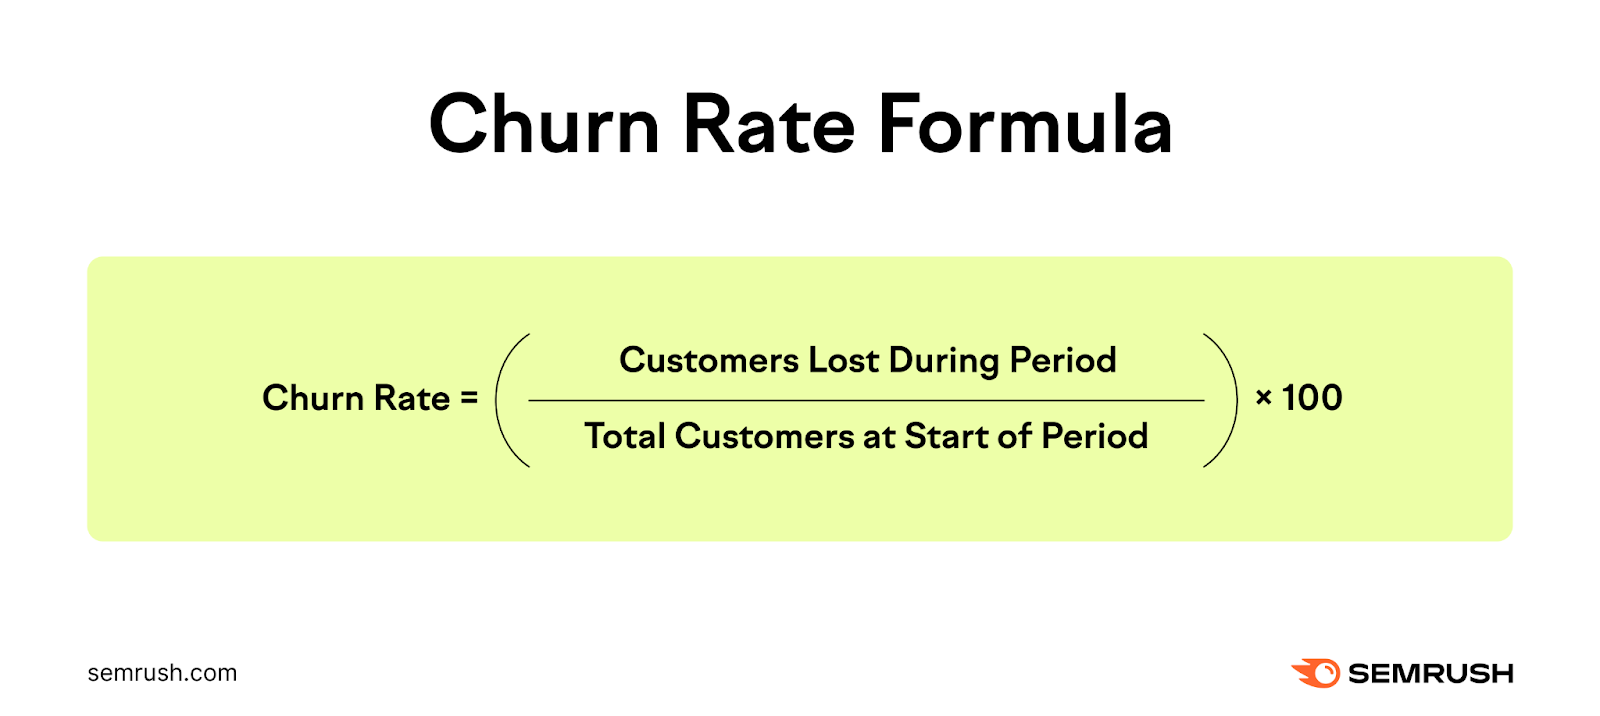 Churn rate equals customers lost during a time period divided by the total customers at the start of the period, multiplied by 100.